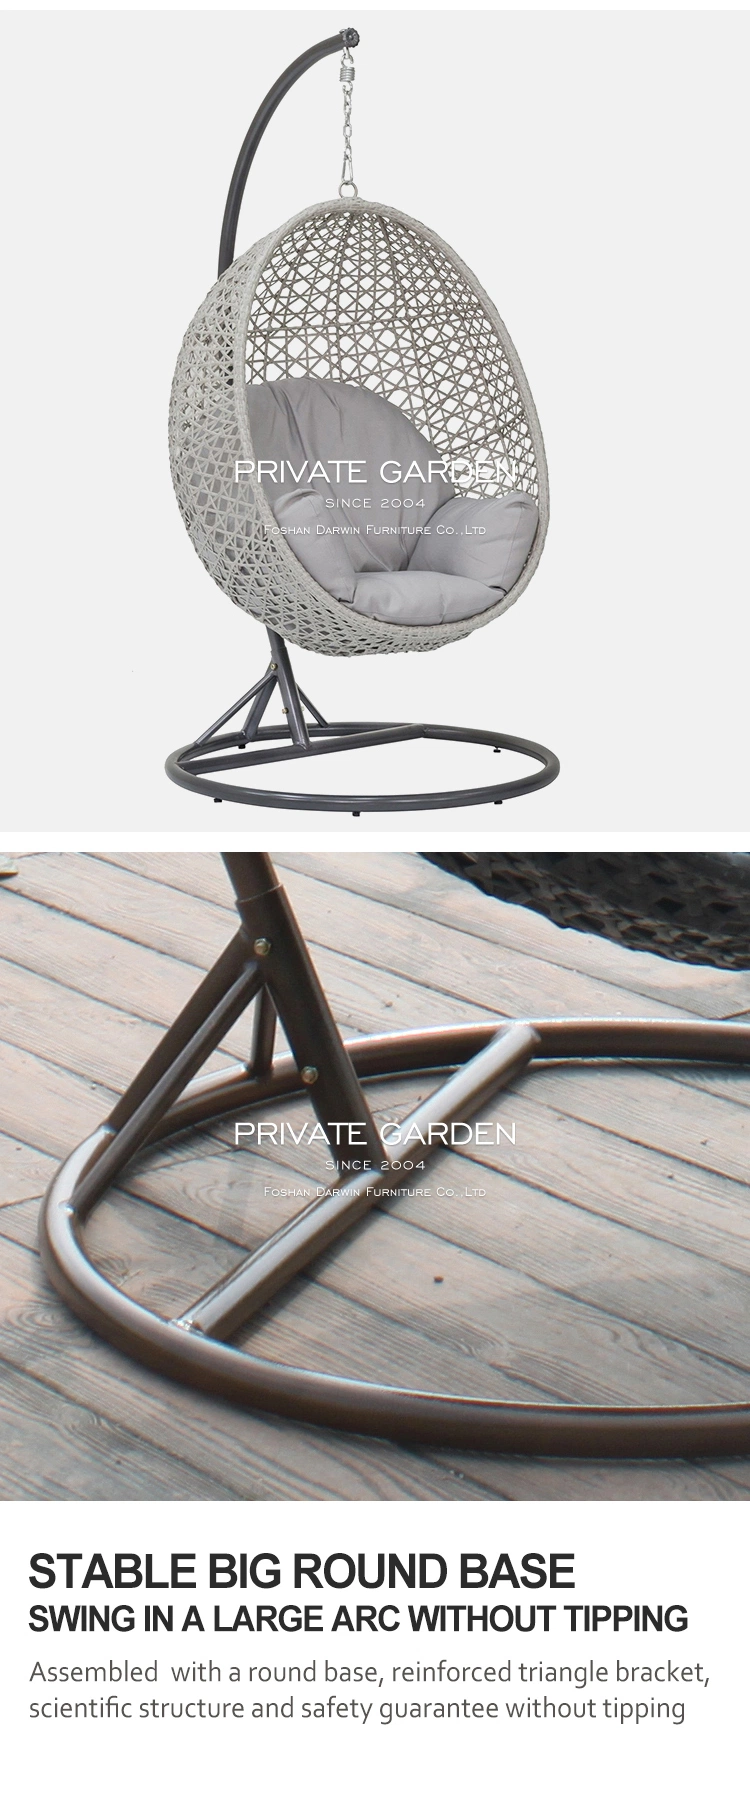 New OEM Foshan Factory Hanging with Stand Swinging Seat Garden Egg Hammock Chair